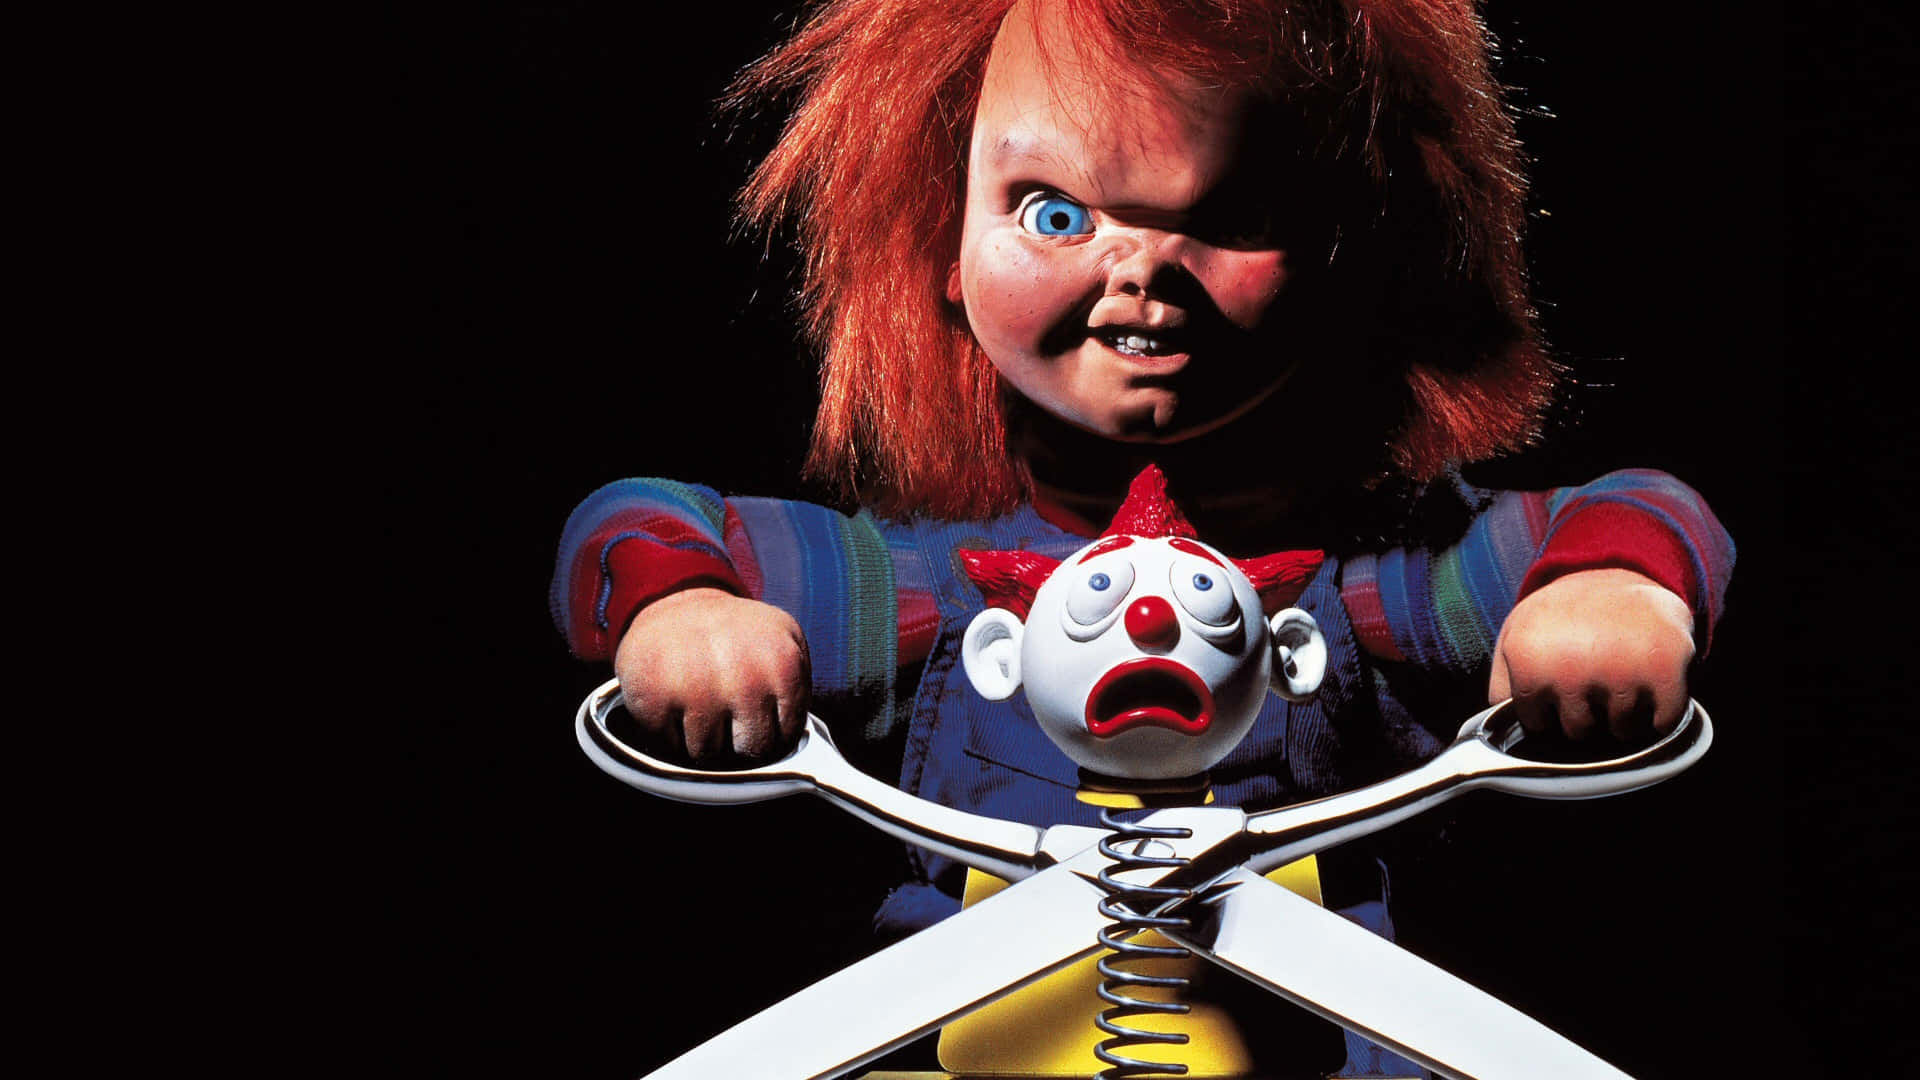 Free Chucky Doll Wallpaper Downloads, [100+] Chucky Doll Wallpapers for  FREE 